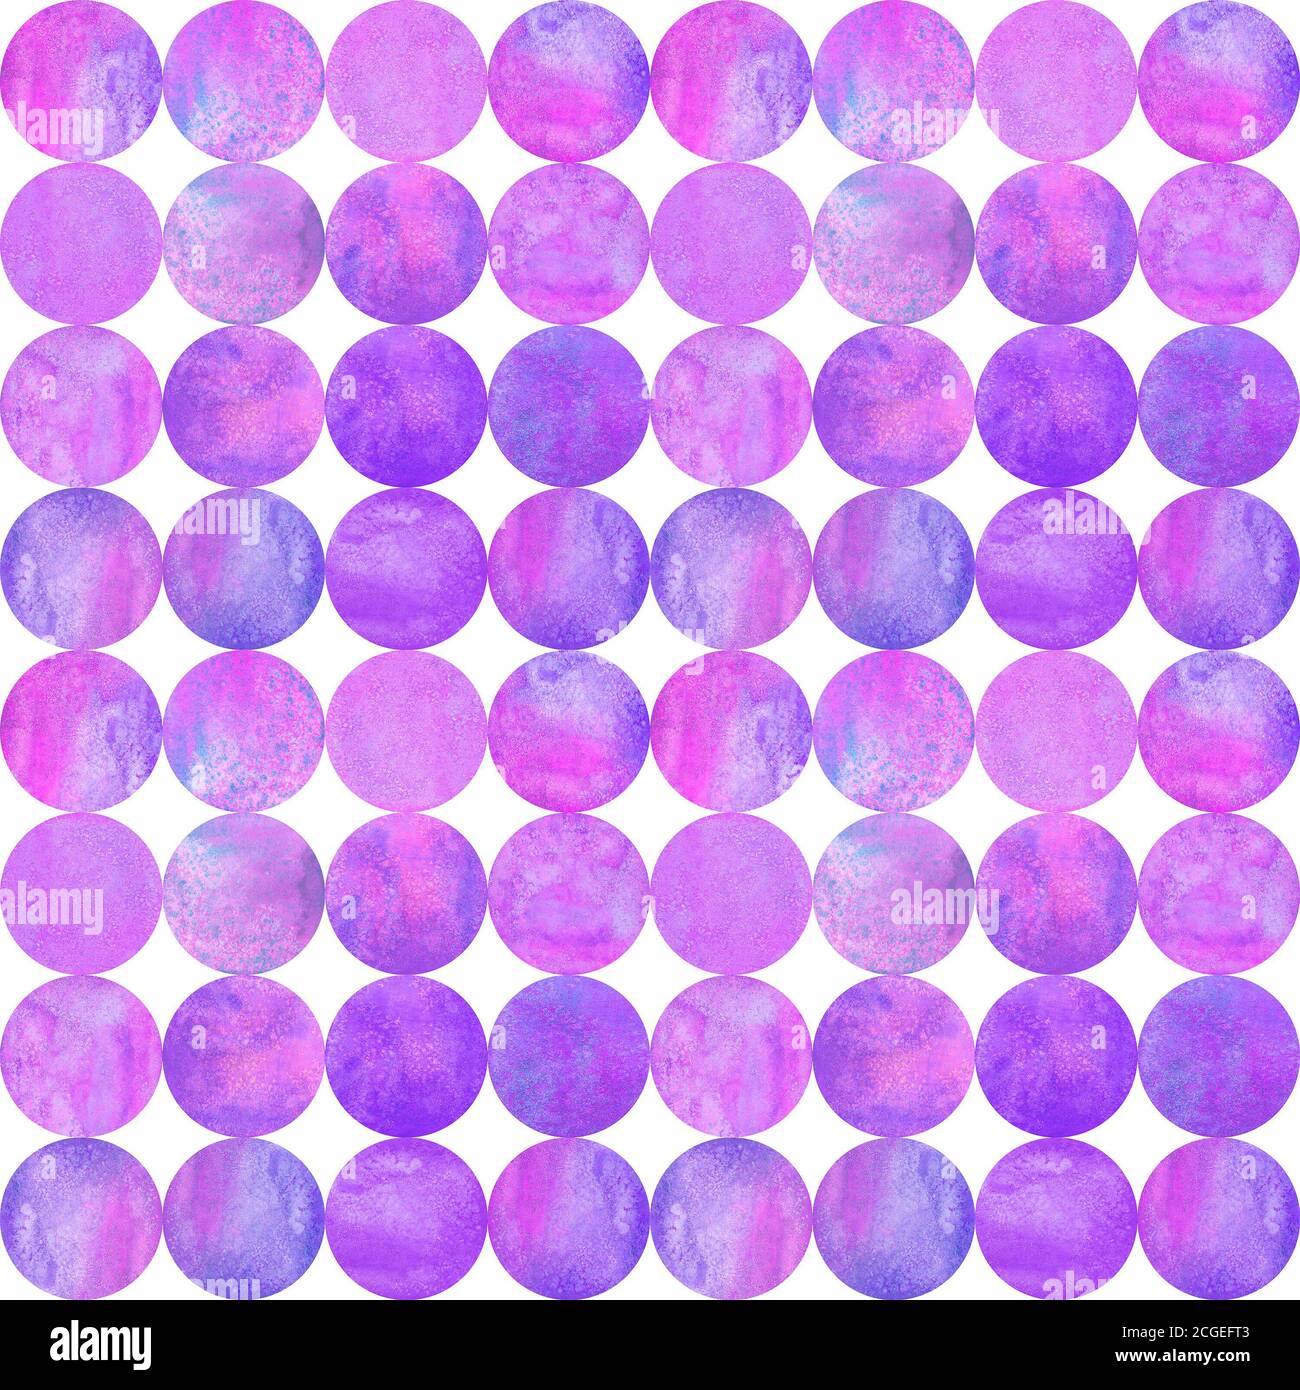 Abstract watercolor background with colorful circles on white. Watercolor hand drawn teal purple blue seamless pattern. Watercolour round shaped textu Stock Photo